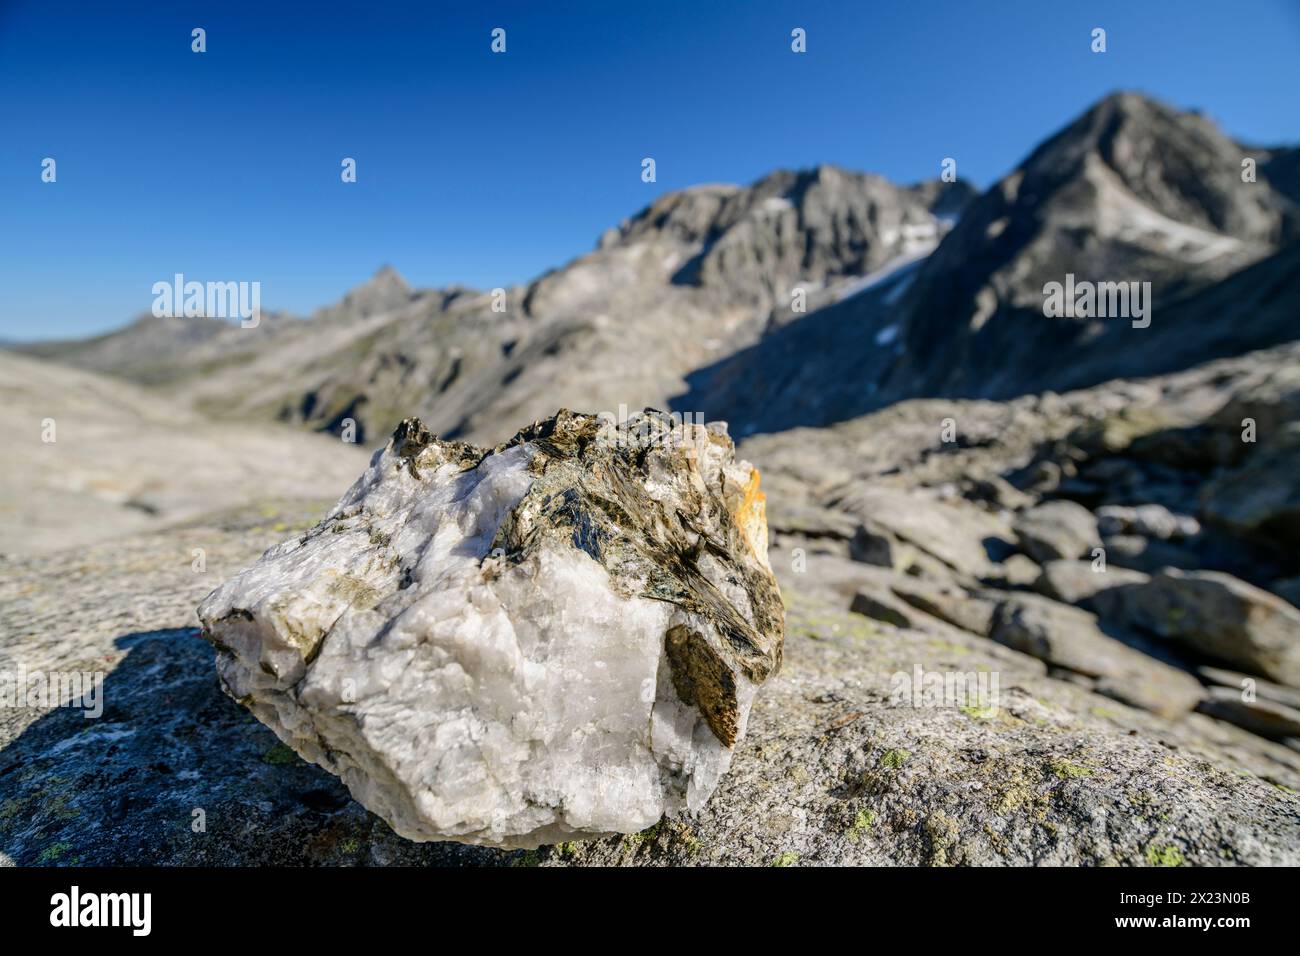 Quartz stone with Zillertal Alps out of focus in the background, from Keilbachjoch, Zillertal Alps, Zillertal Alps Nature Park, Tyrol, Austria Stock Photo